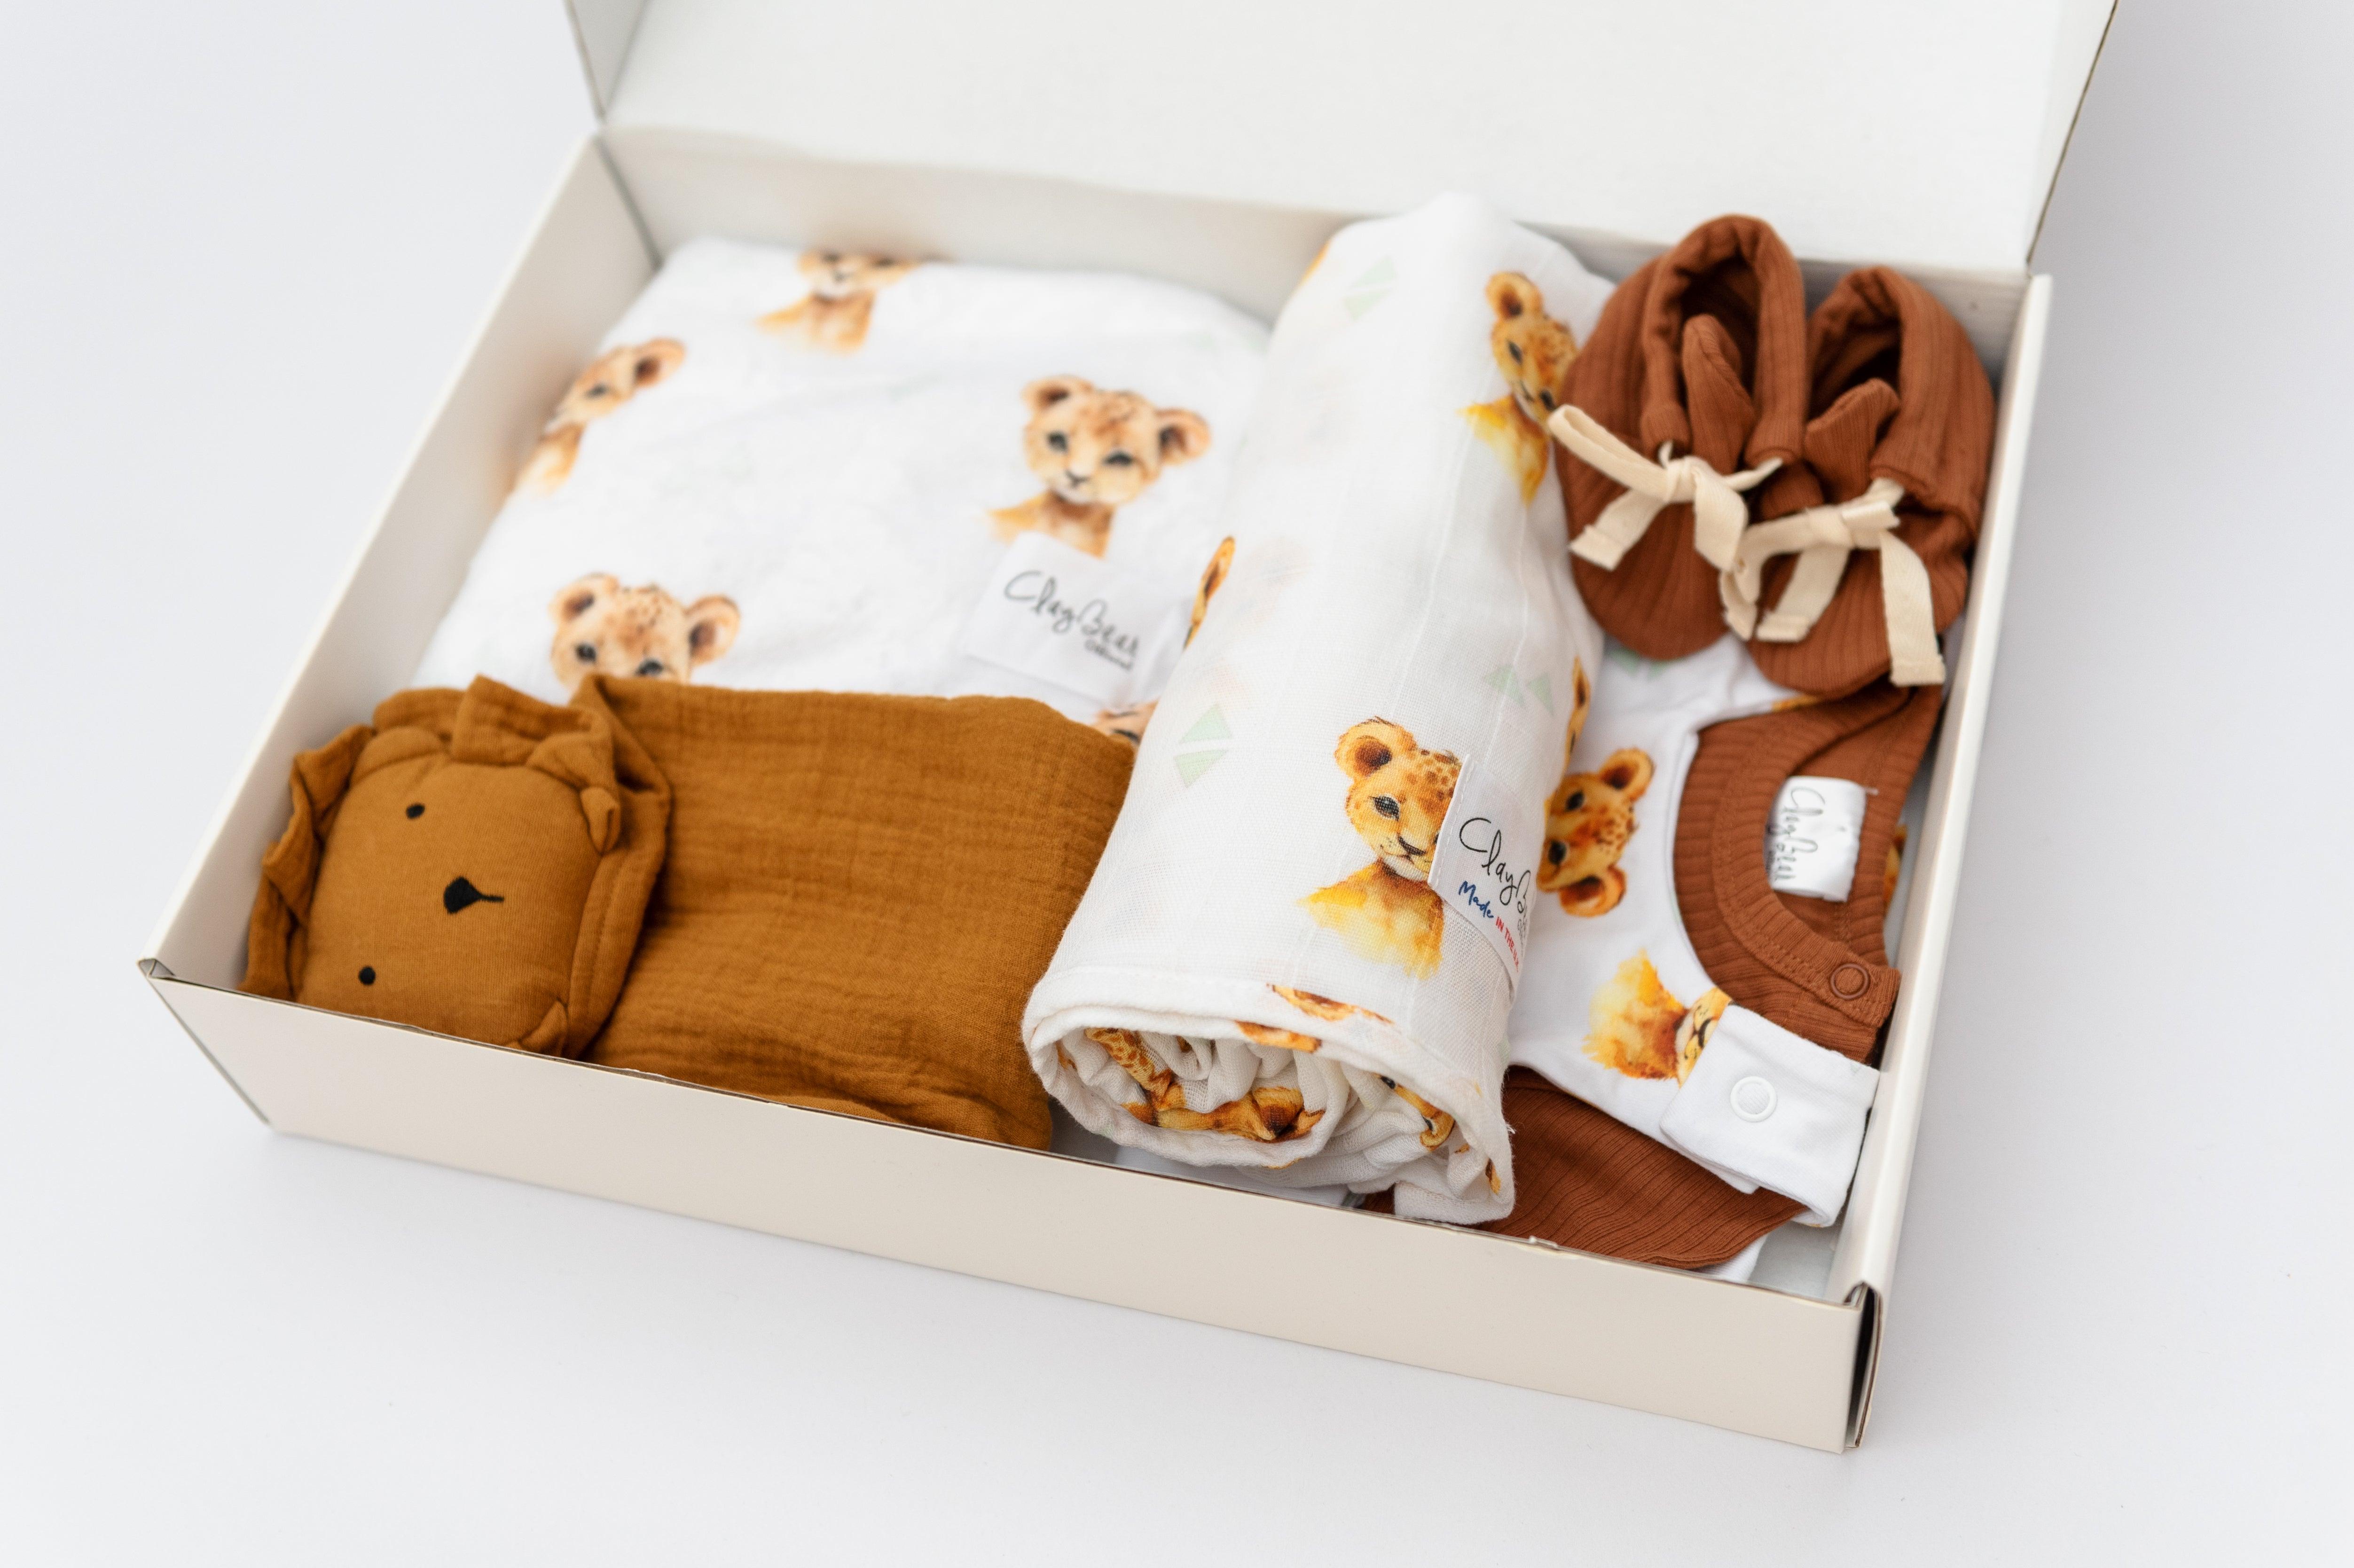 files/new-baby-gift-box-lion-cub-claybearofficial-9.jpg